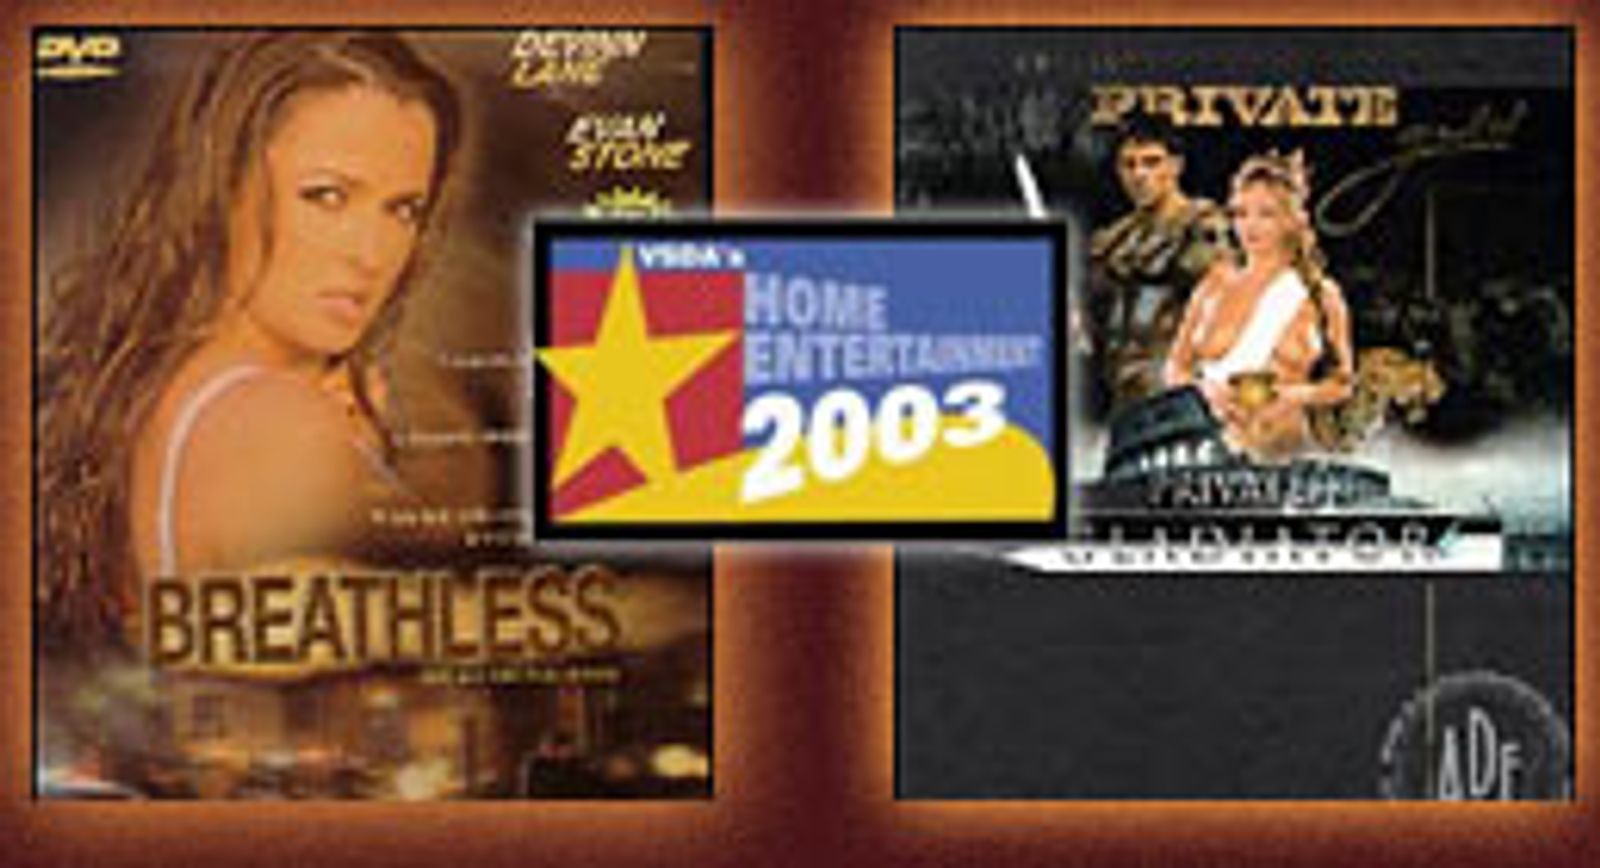 Wicked&#8217;s Breathless and Private&#8217;s Private Gladiator Win Home Entertainment 2003 Honors